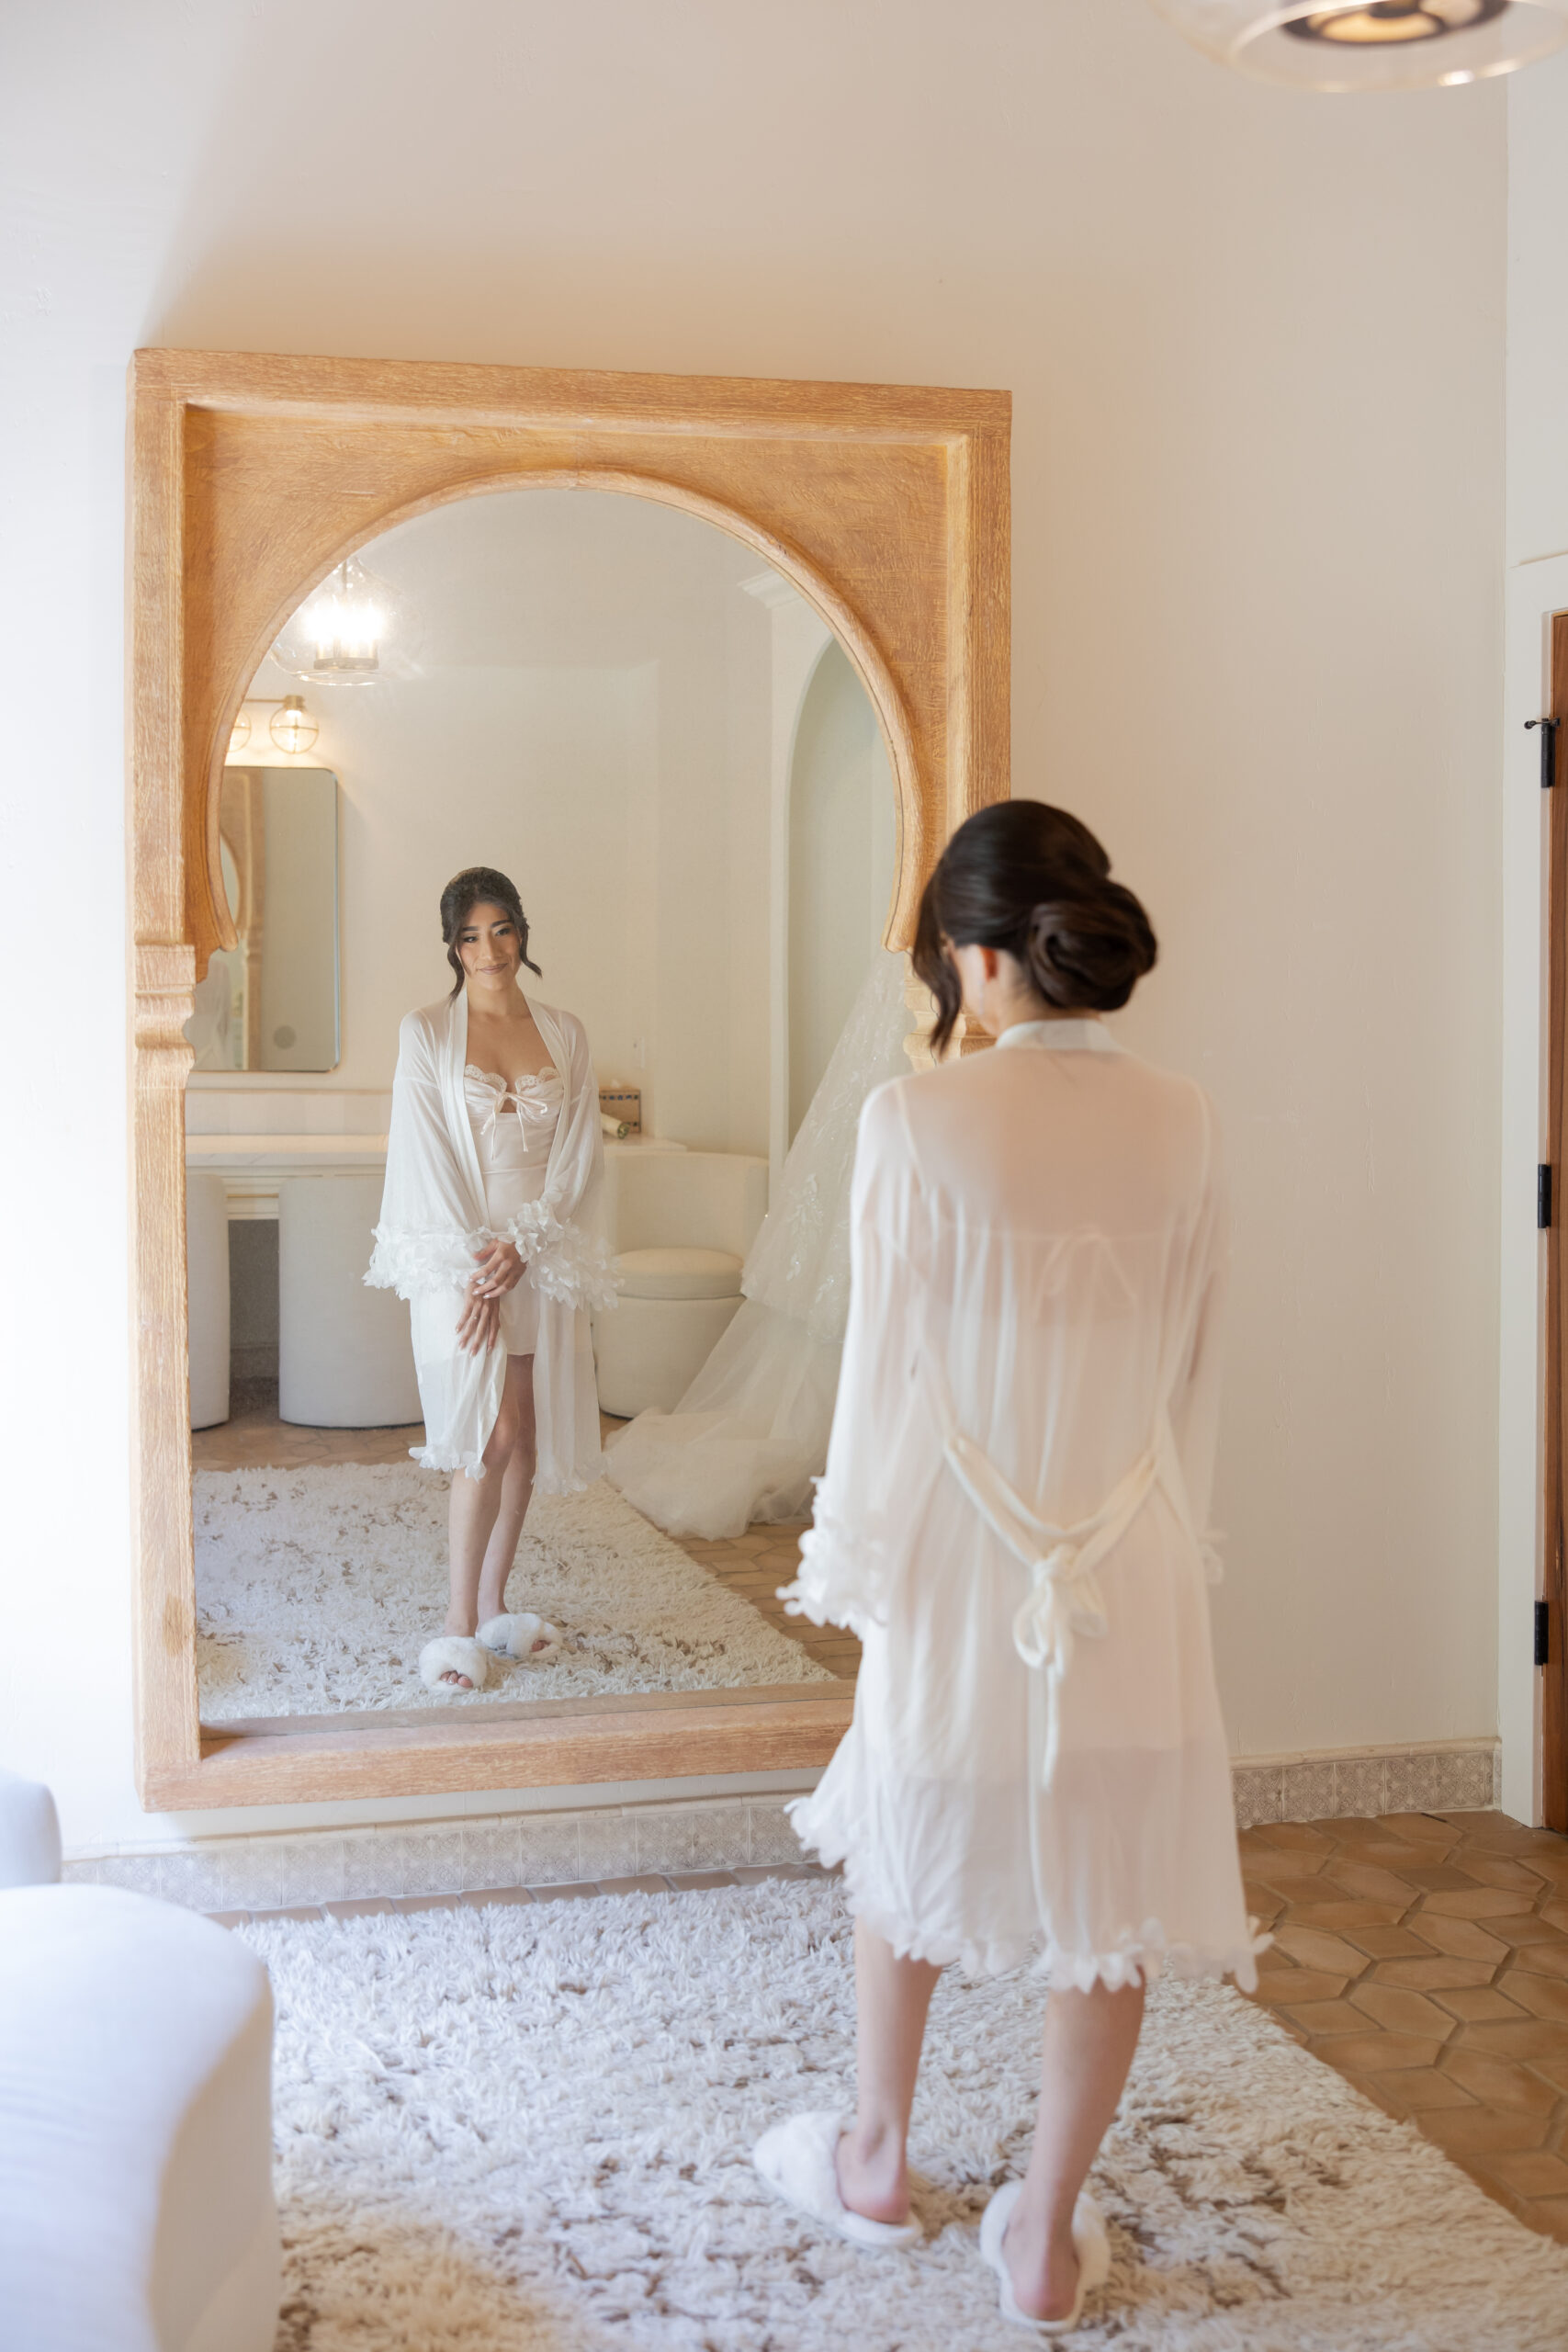 Bride getting ready portrait standing in front of a full-size mirror in the Grand Gimeno bridal suite.